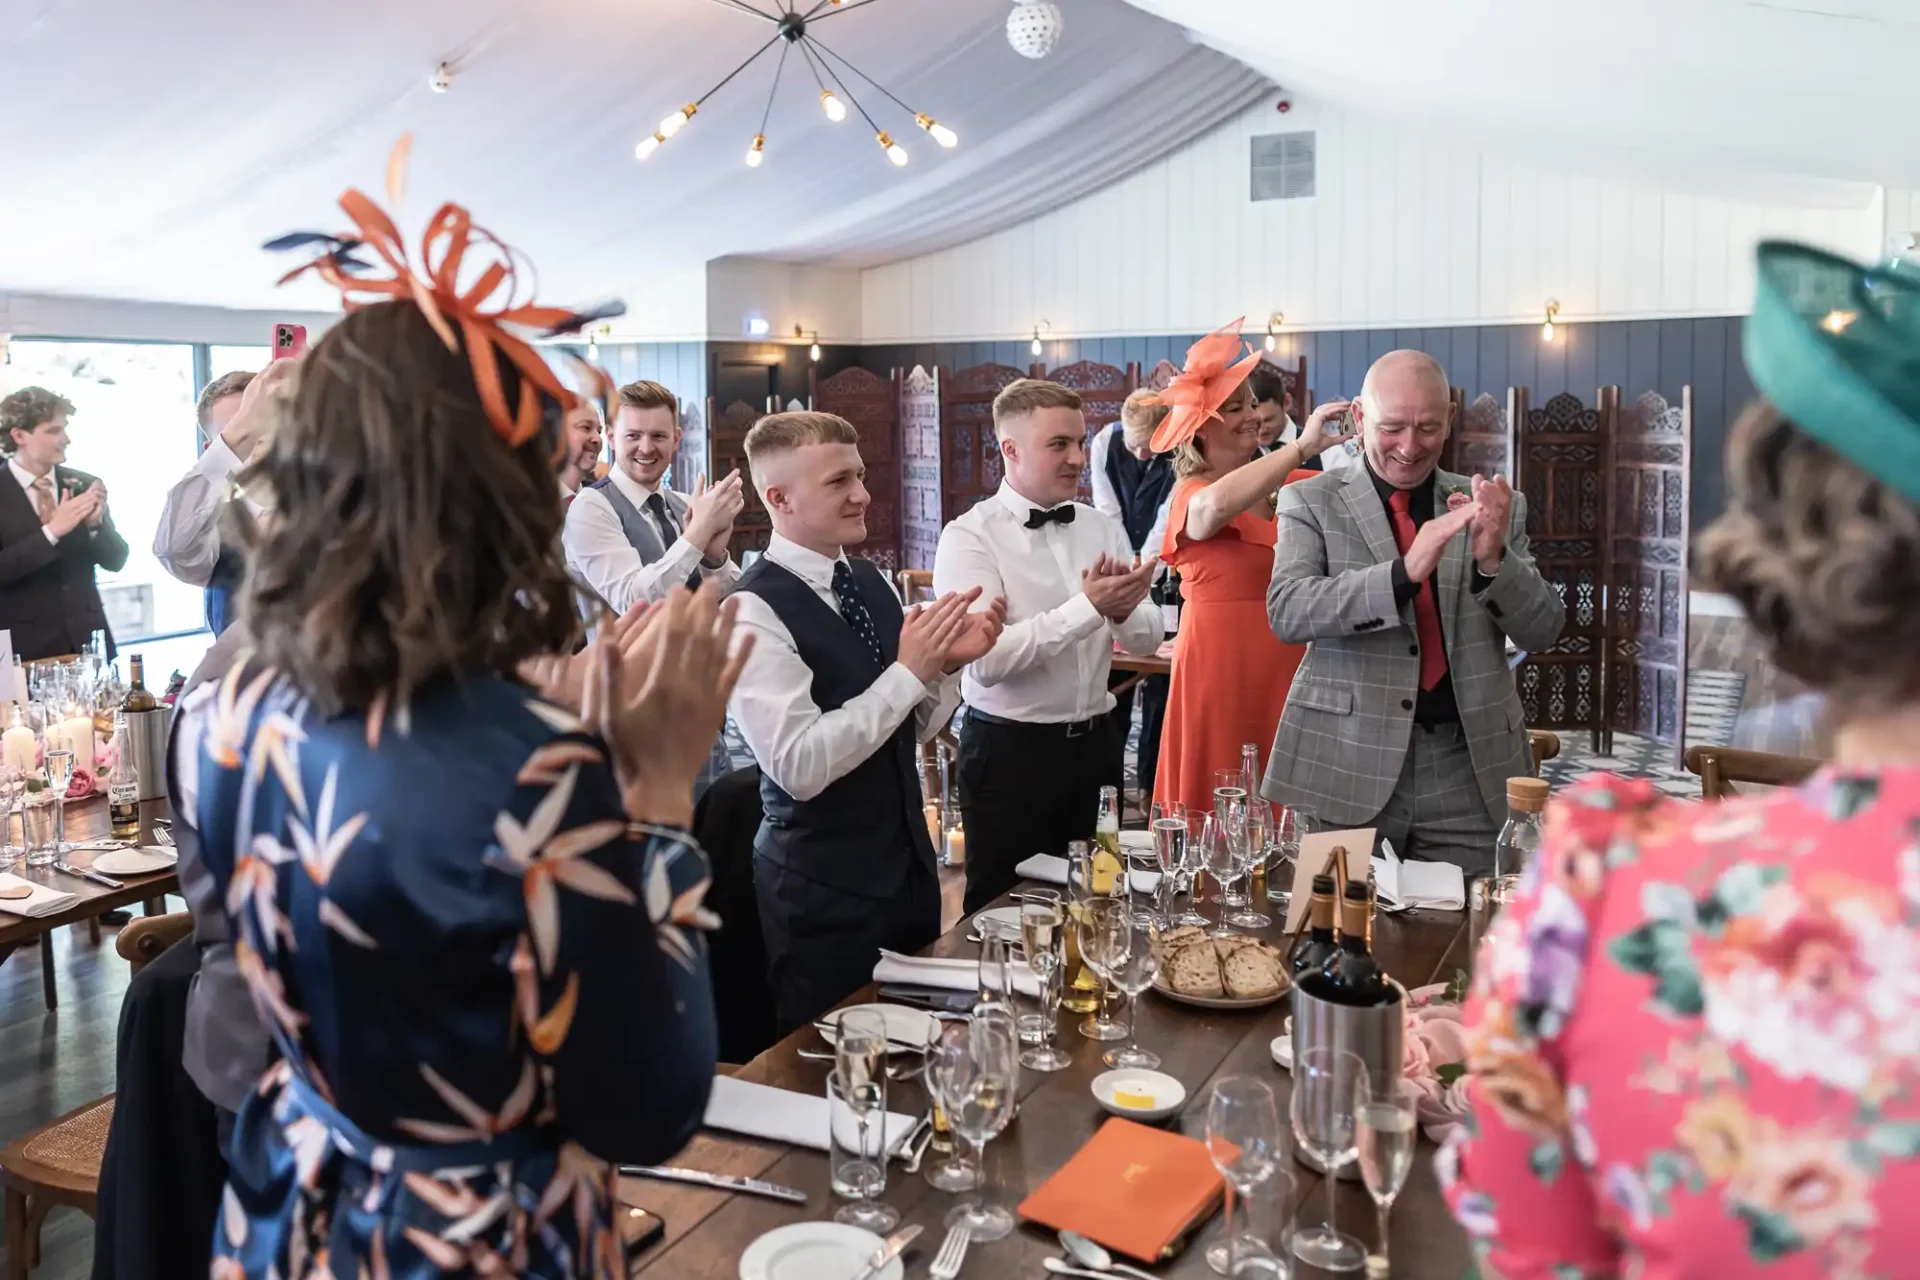 Guests clapping for a couple at a wedding reception inside a tent, with some attendees in elegant hats.